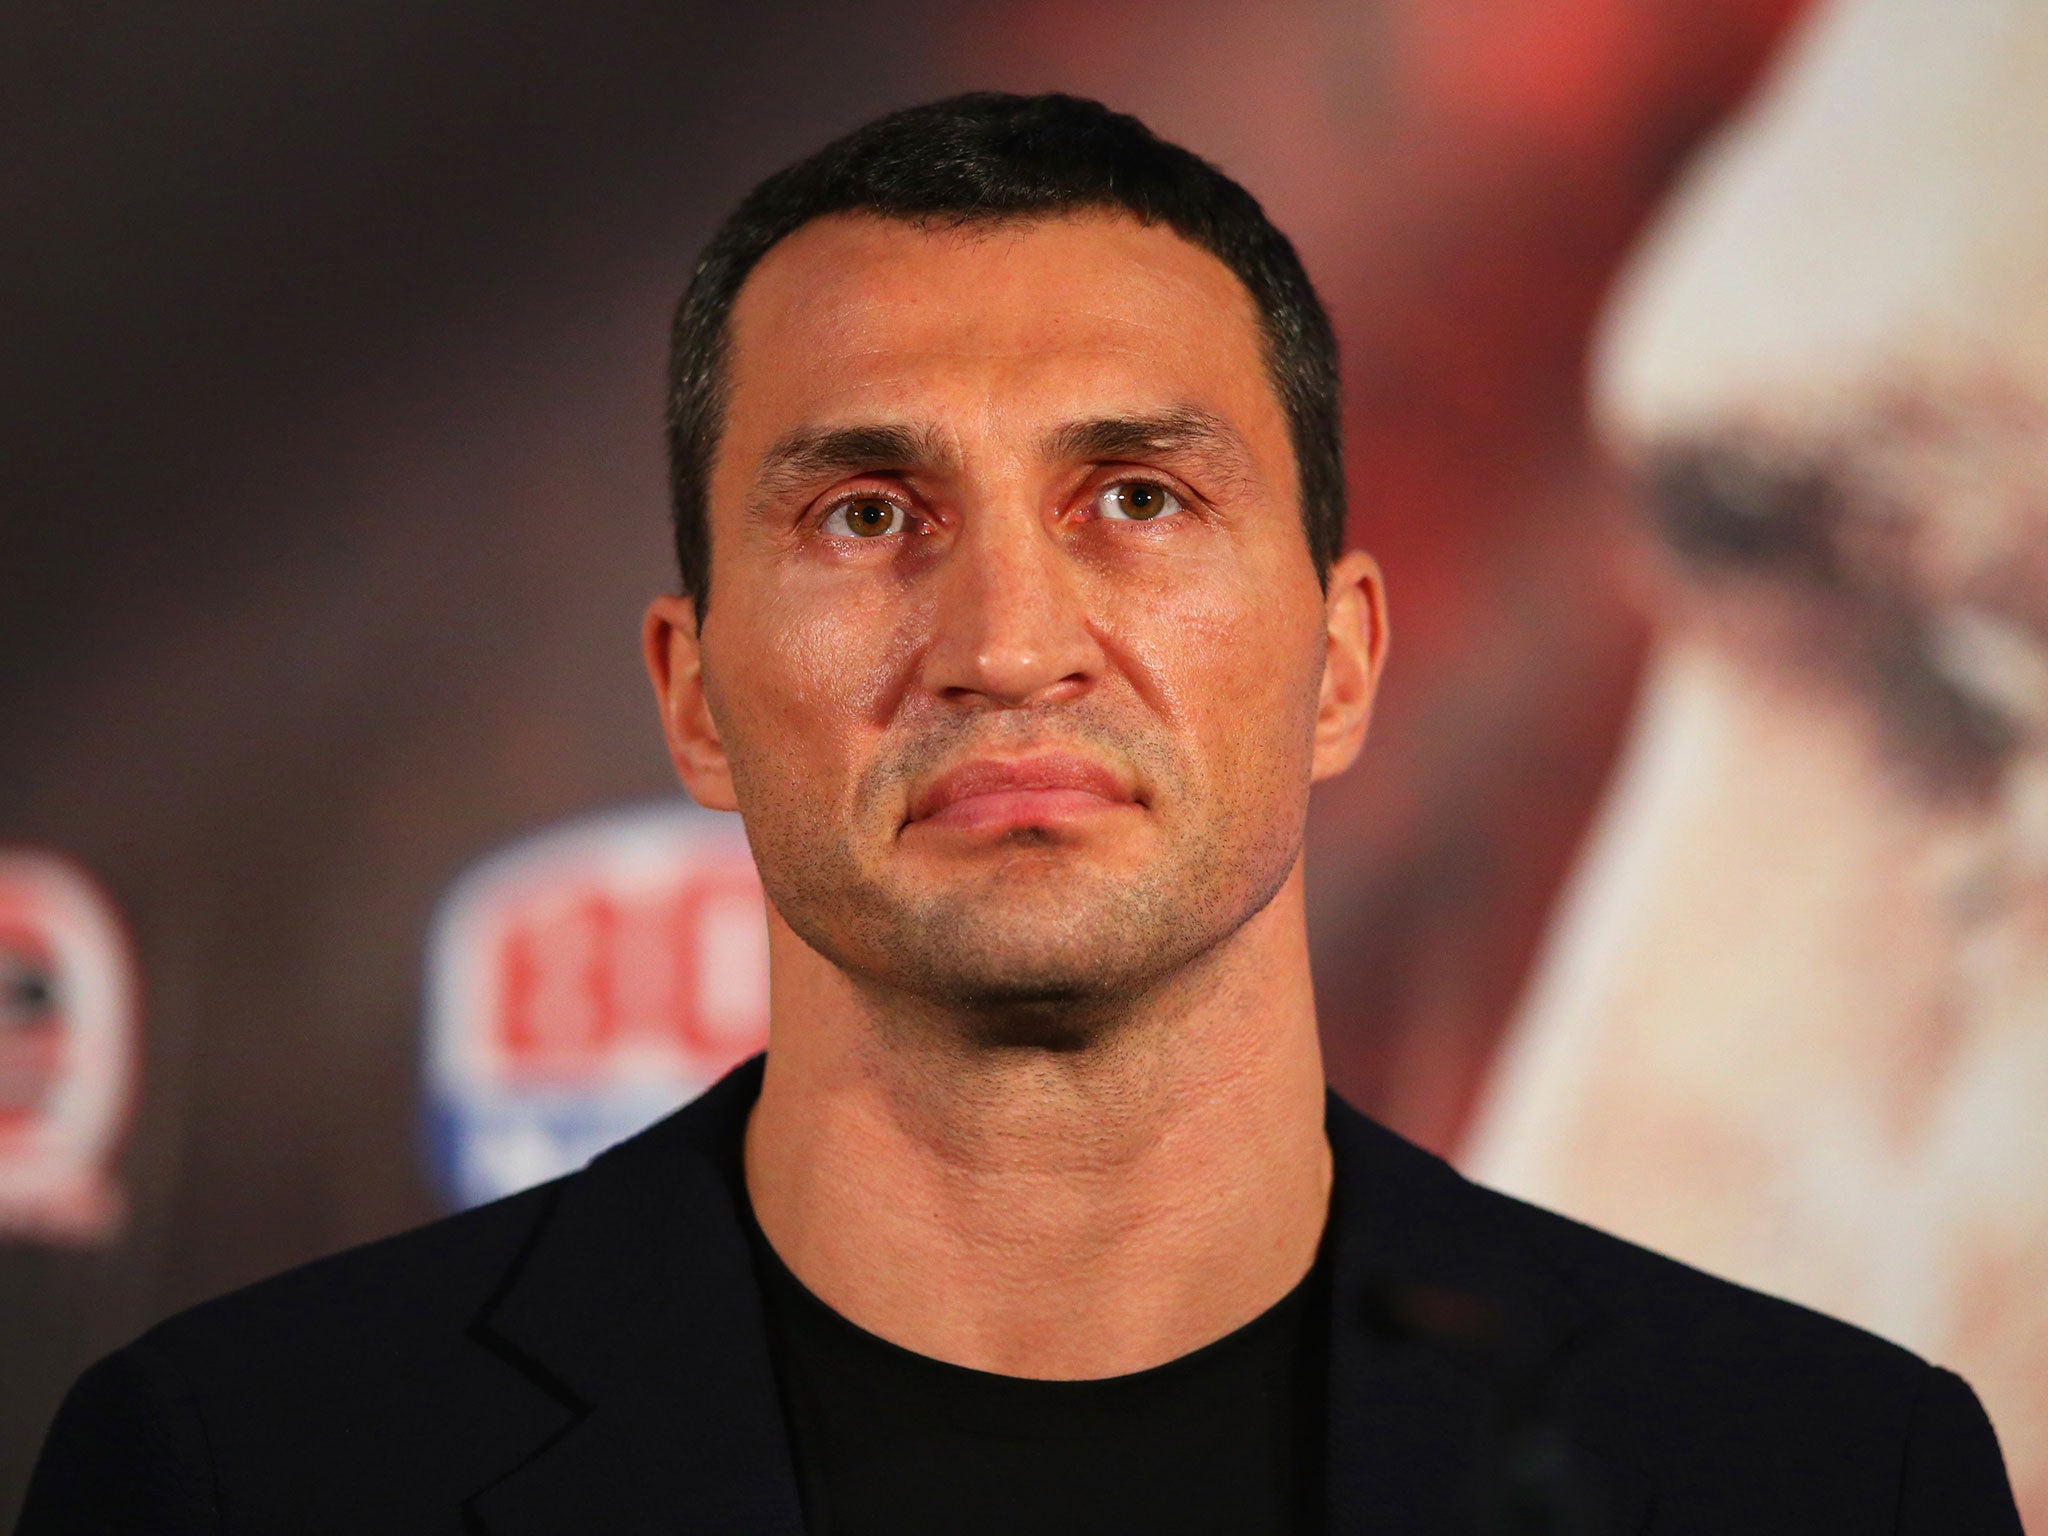 Klitschko and Joshua had been set to face one another in December but the fight fell through after Klitschko’s camp pulled out